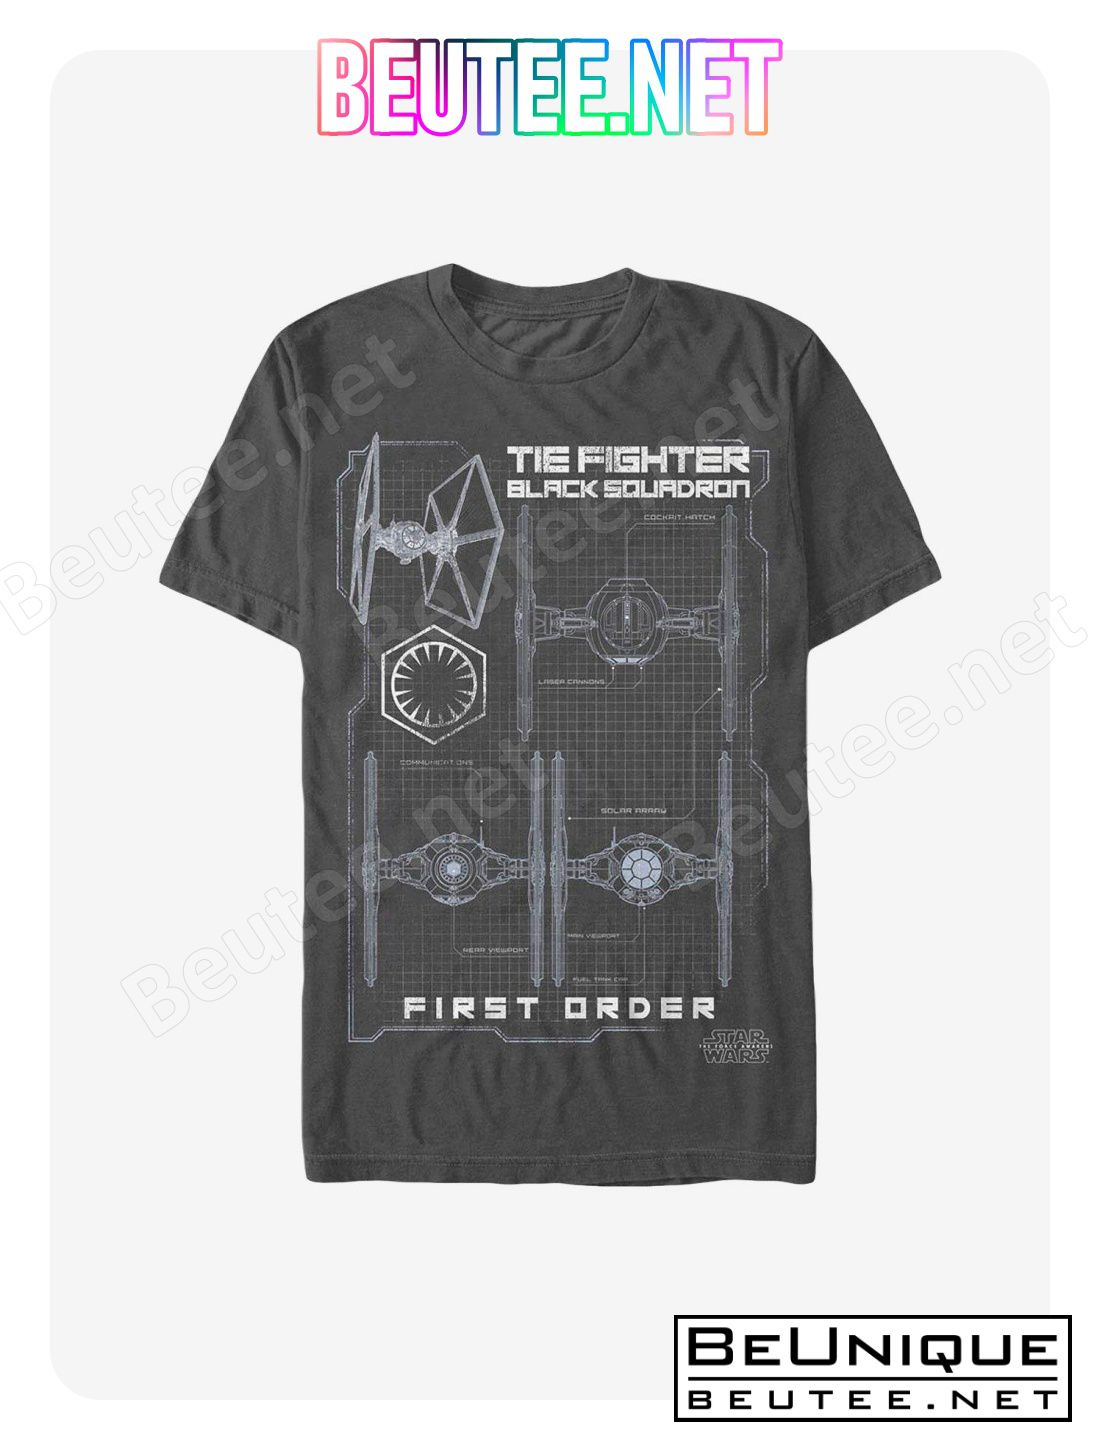 Star Wars The Force Awakens Tie Fighter Black Squadron T-Shirt